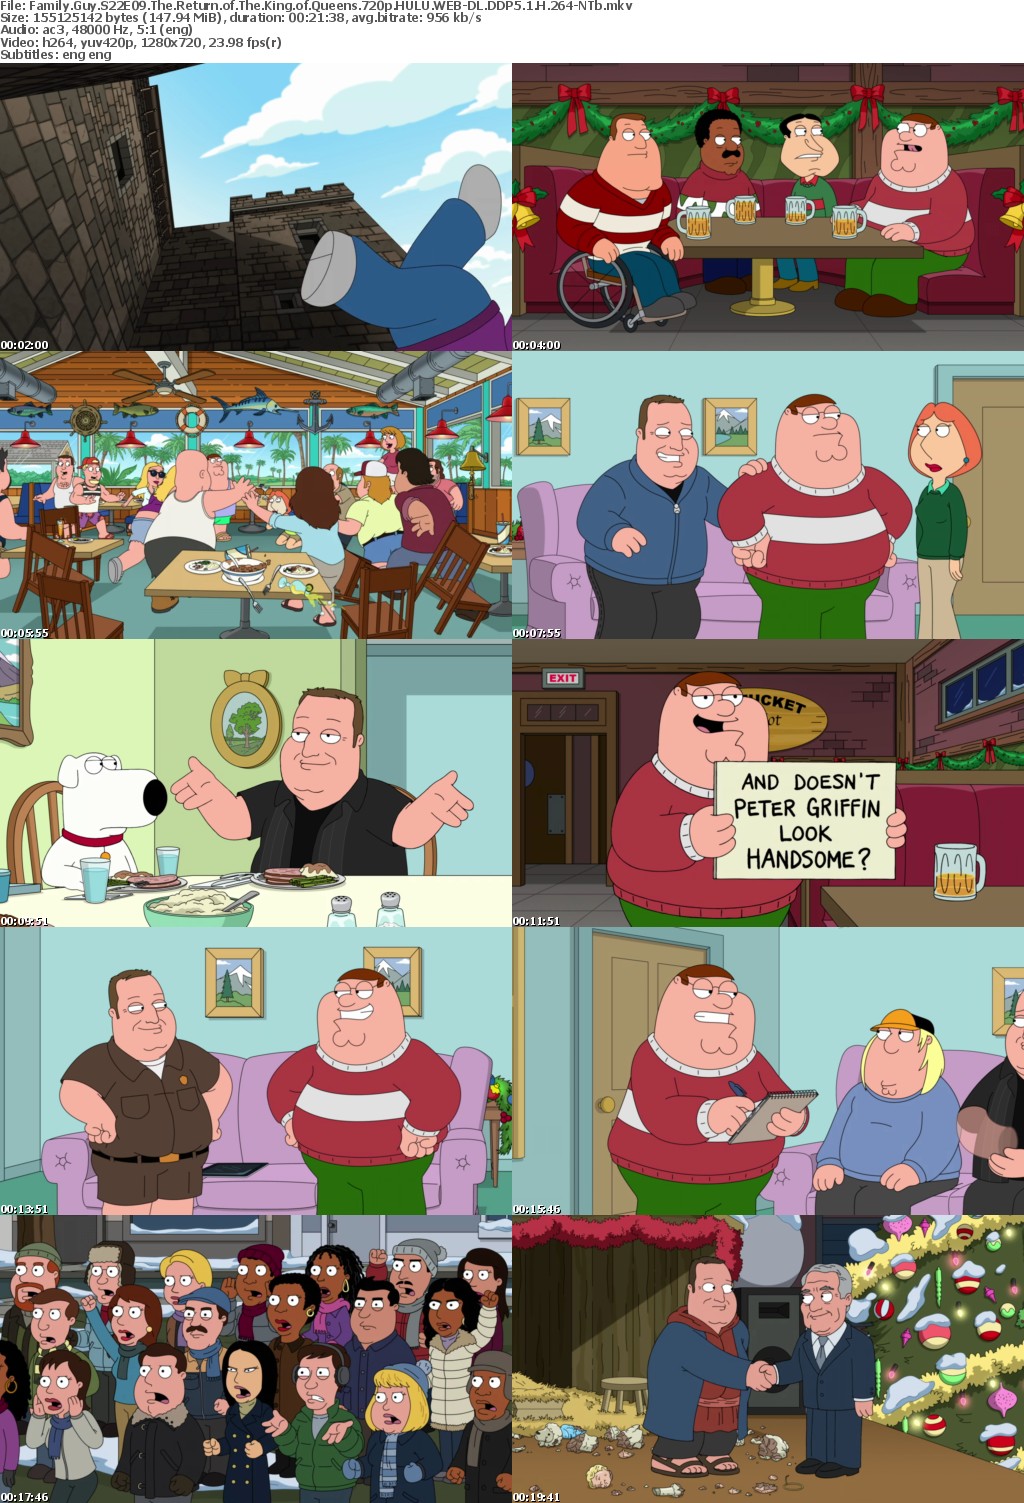 Family Guy S22E09 The Return of The King of Queens 720p HULU WEB-DL DDP5 1 H 264-NTb